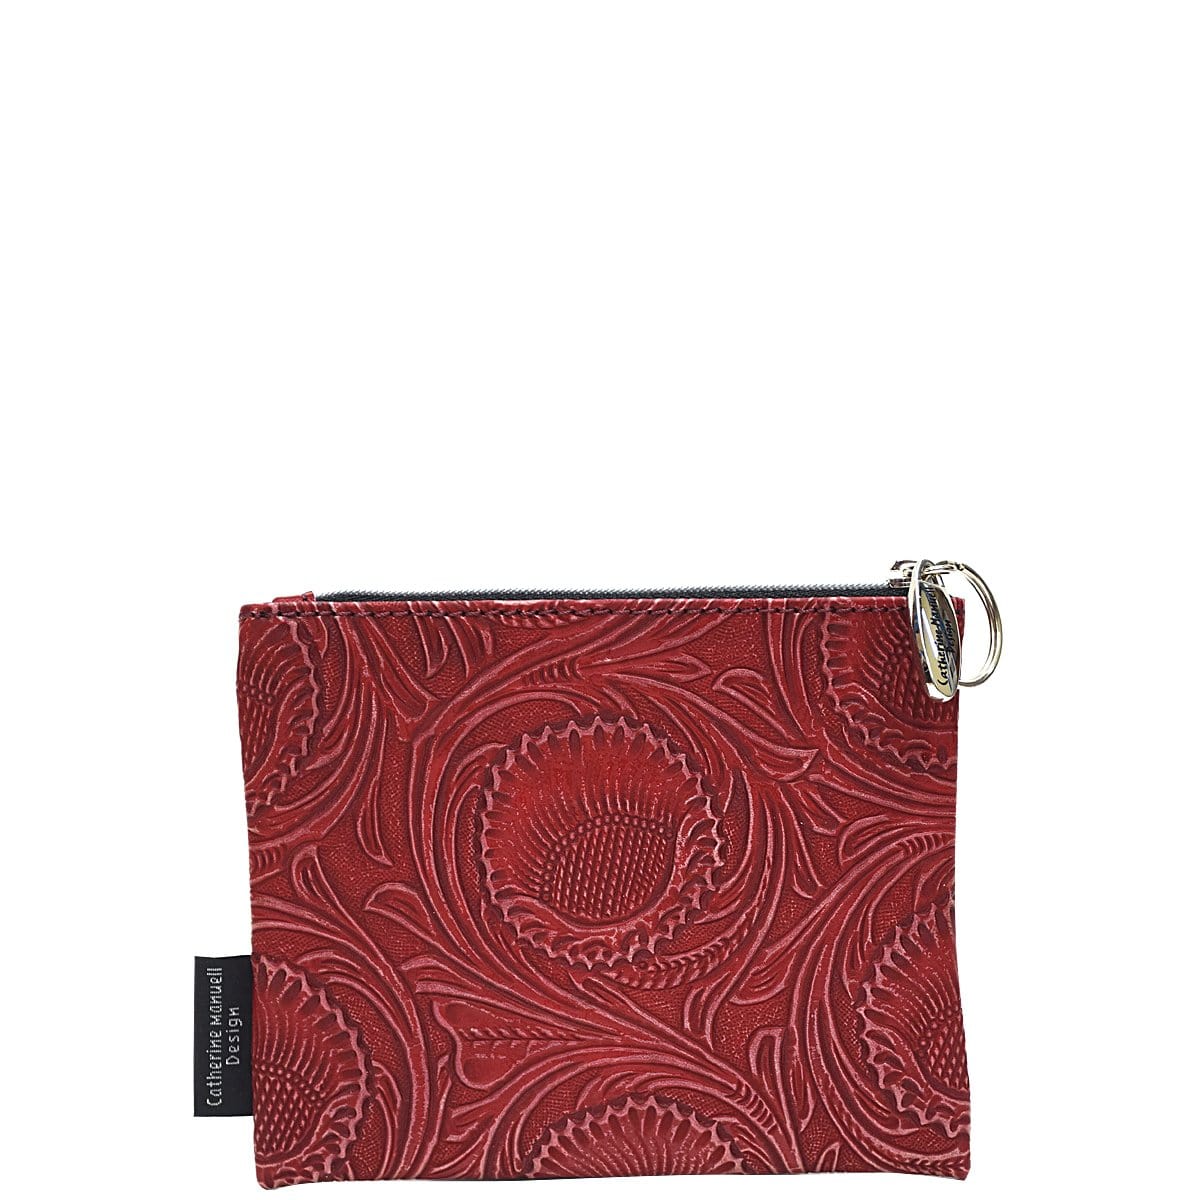 Everyday Purse - Red Thistle - 50% off